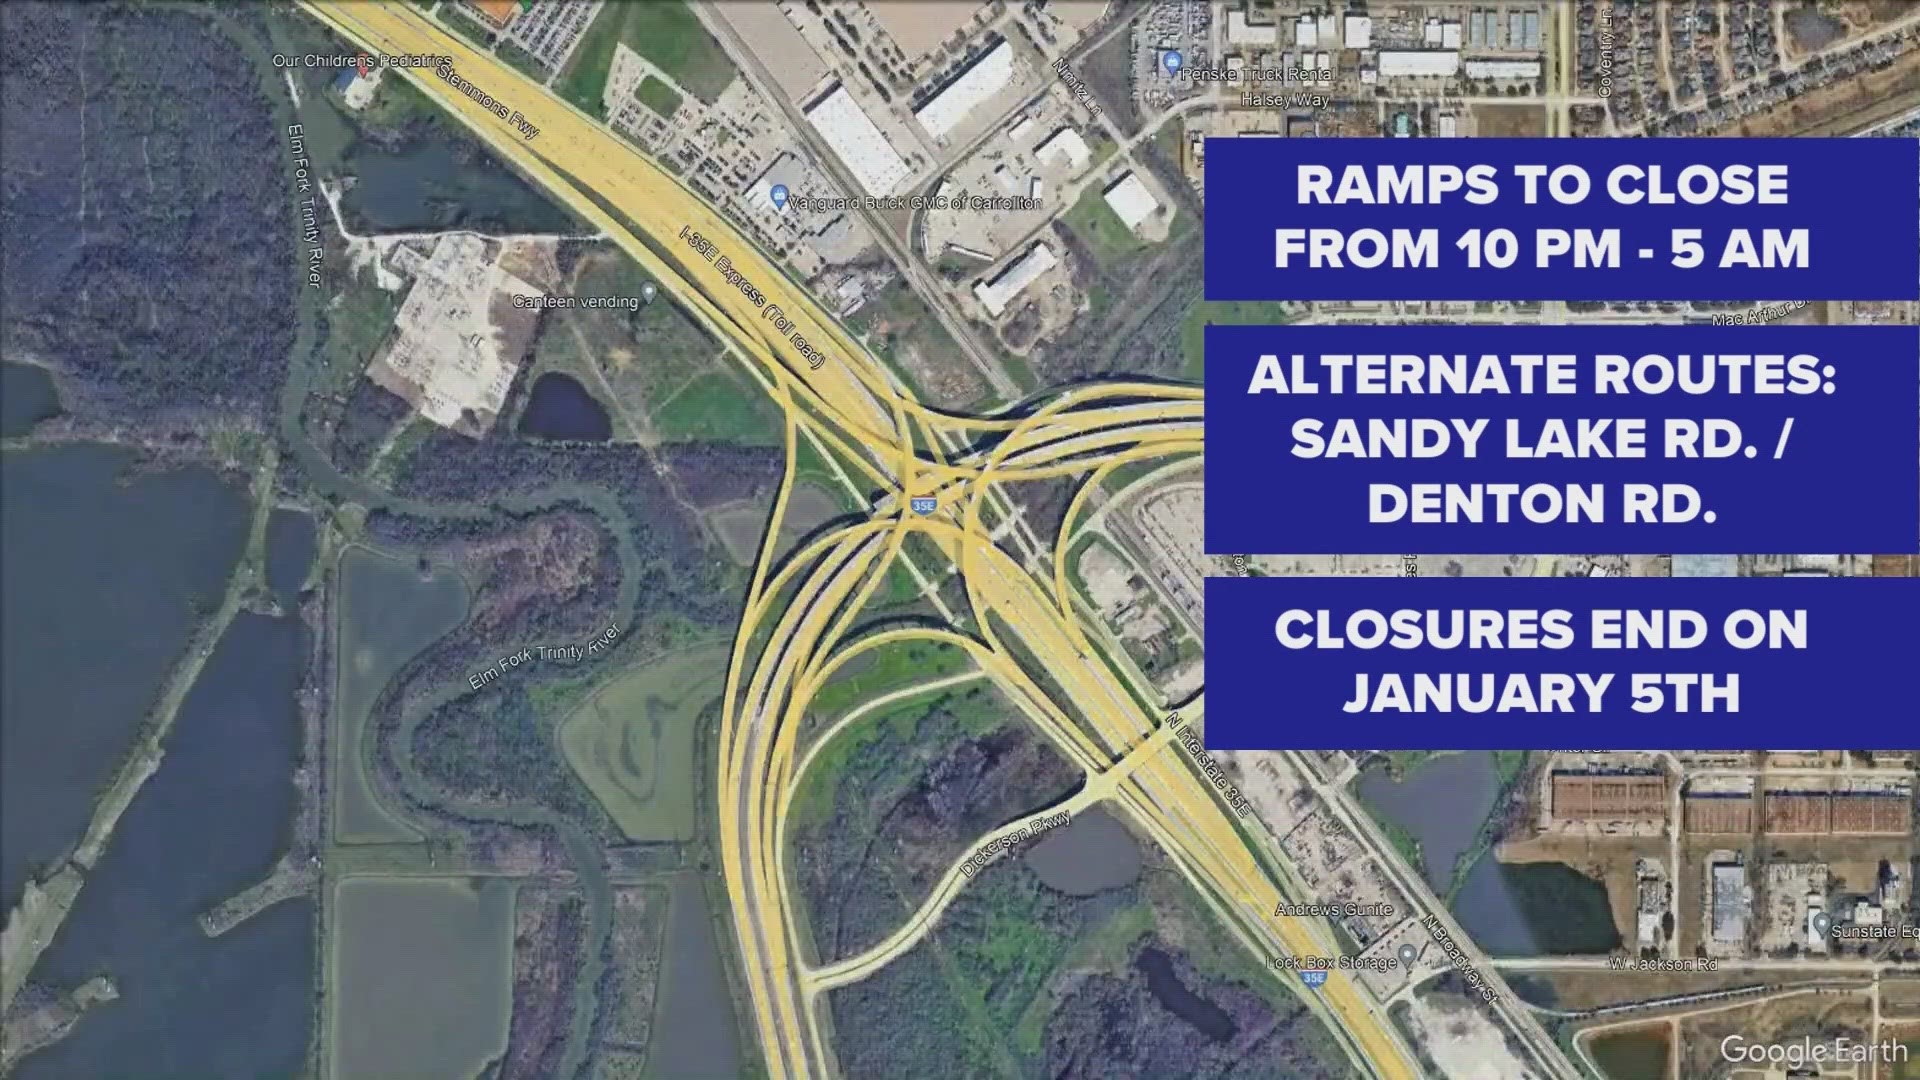 The ramps will be closed from 10 p.m. to 5 a.m. every night for what the NTTA says is routine maintenance